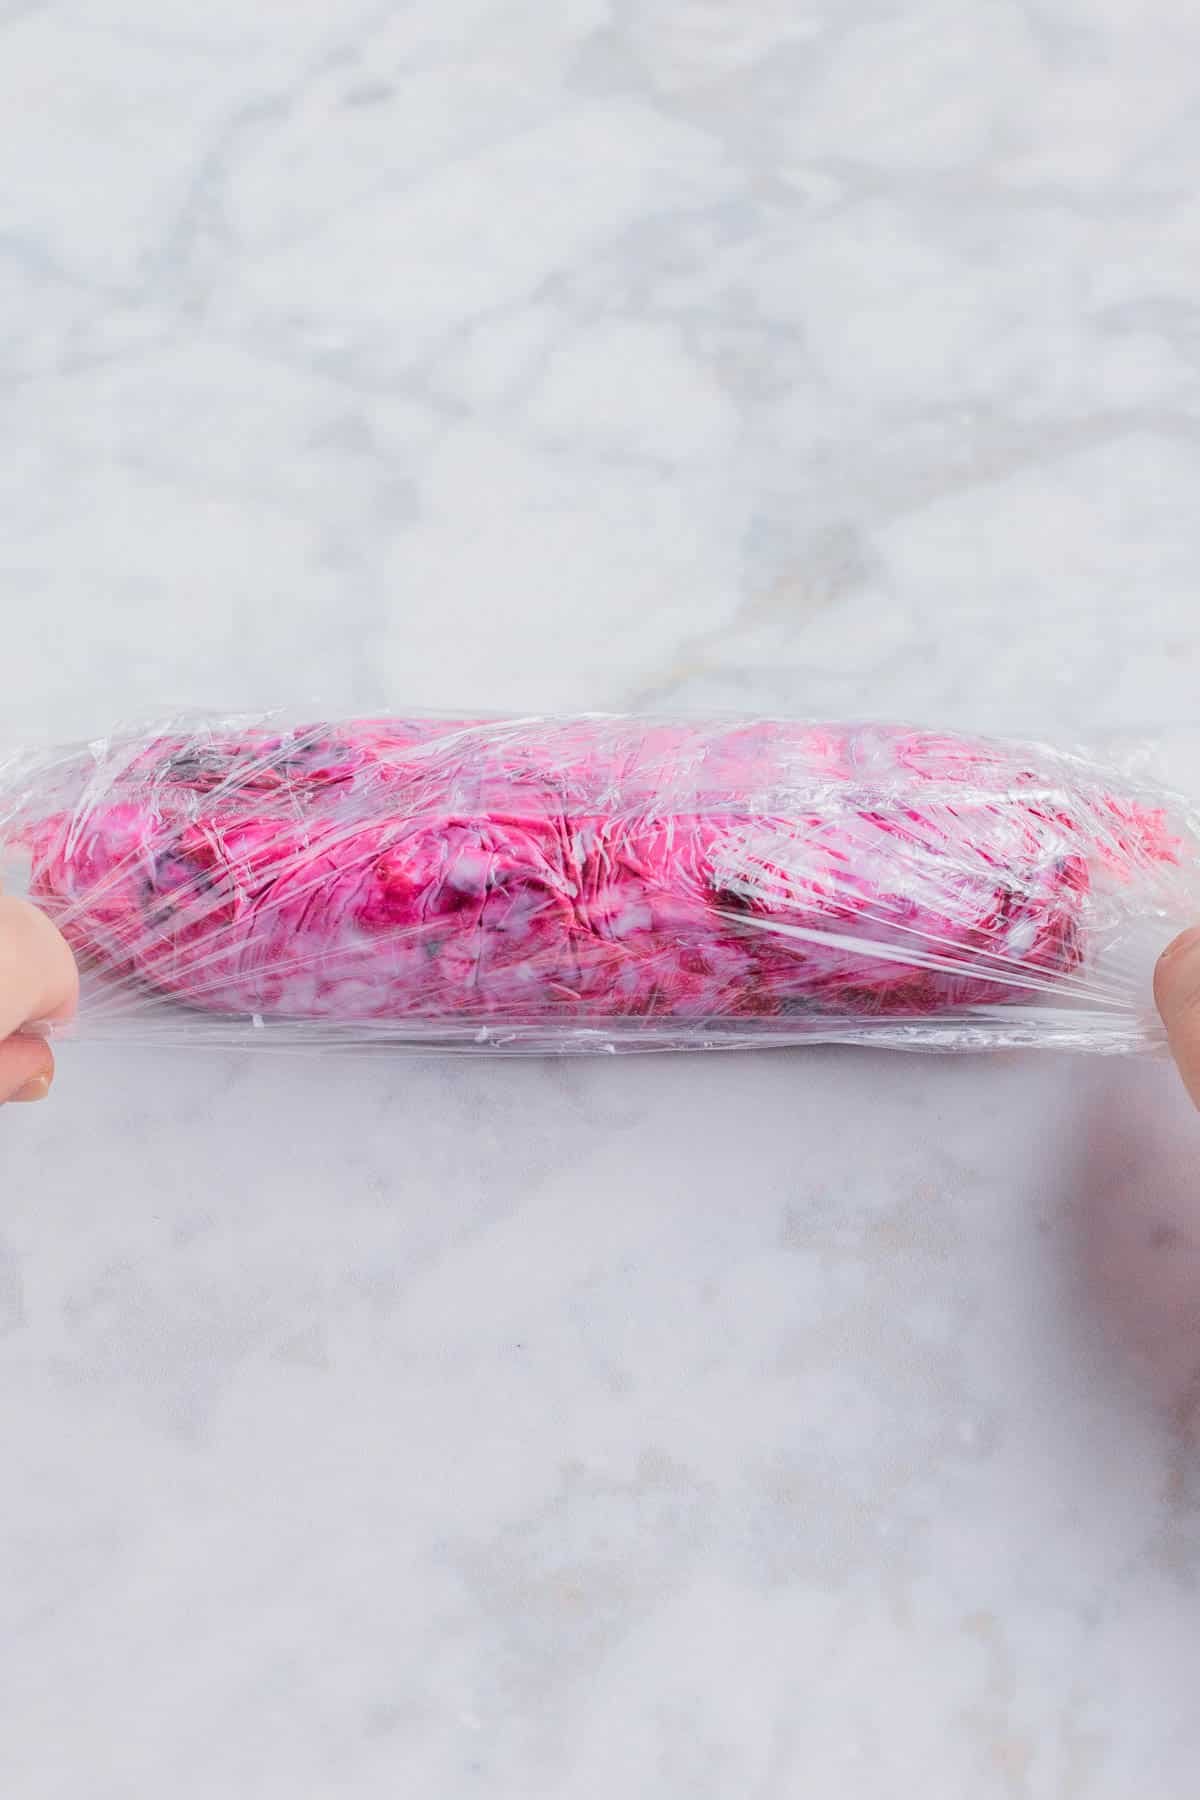 A blueberry goat cheese log is wrapped and shaped in plastic.